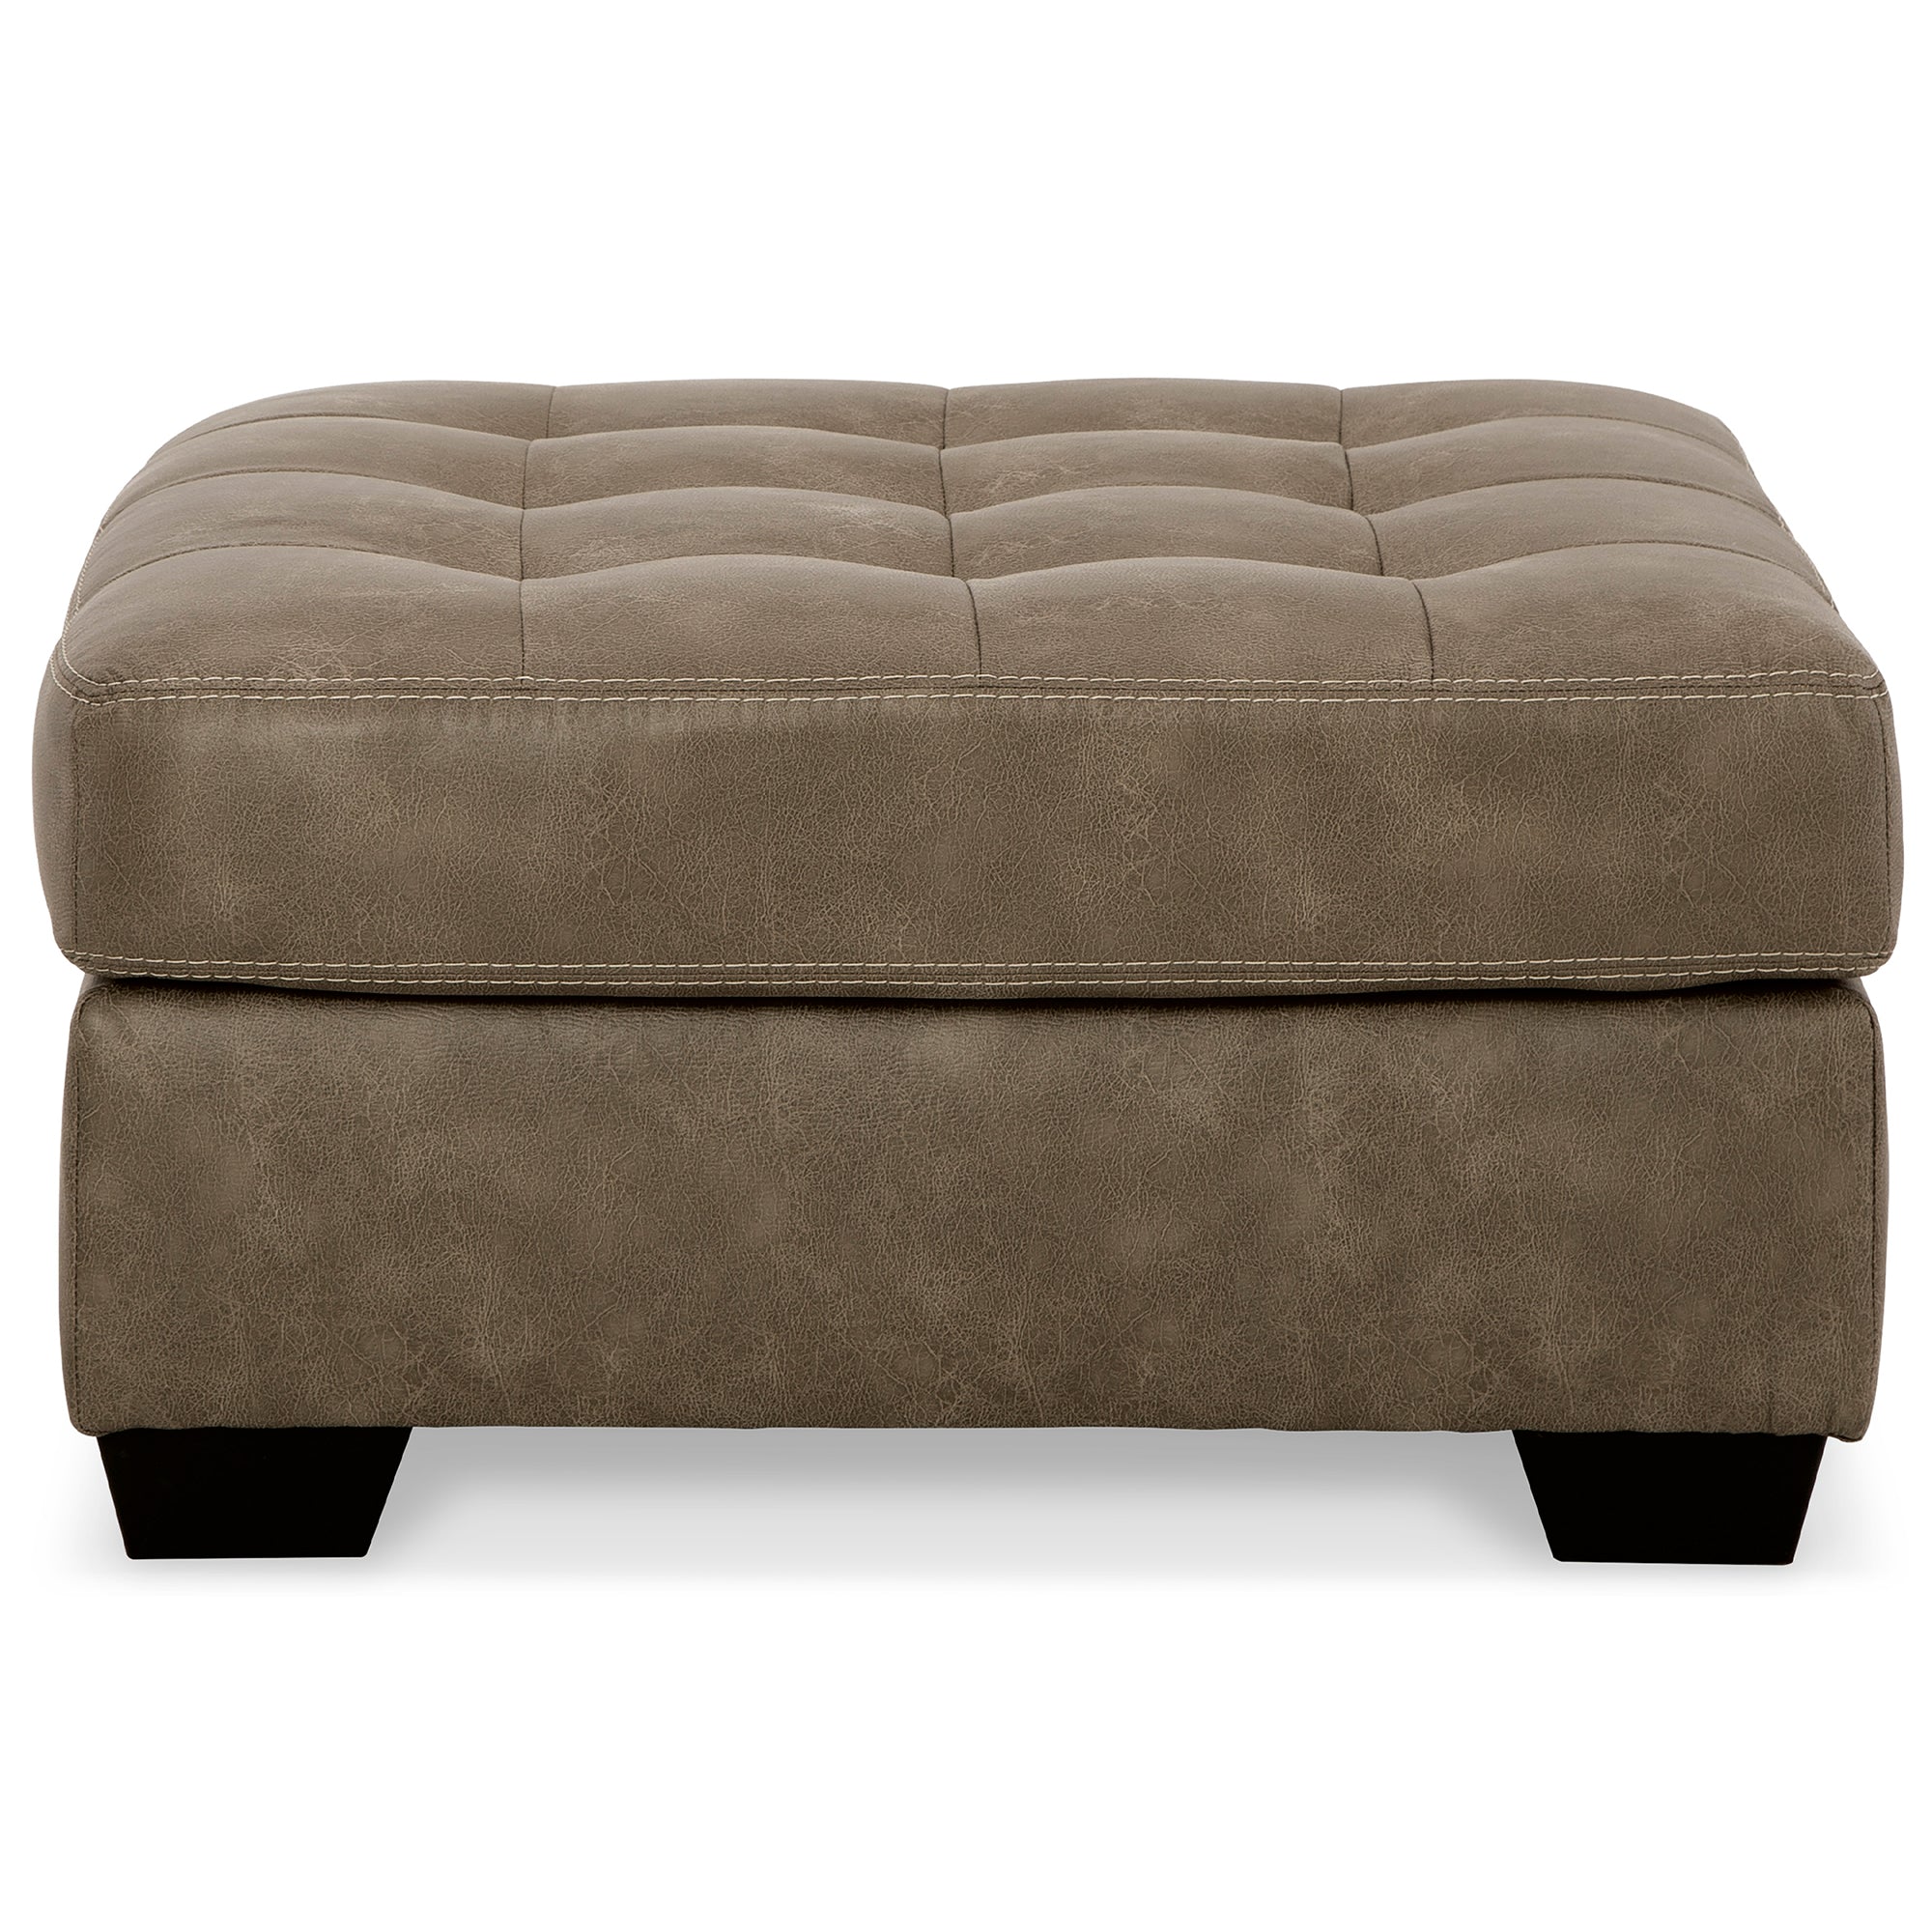 Keskin Oversized Accent Ottoman in Sand Color